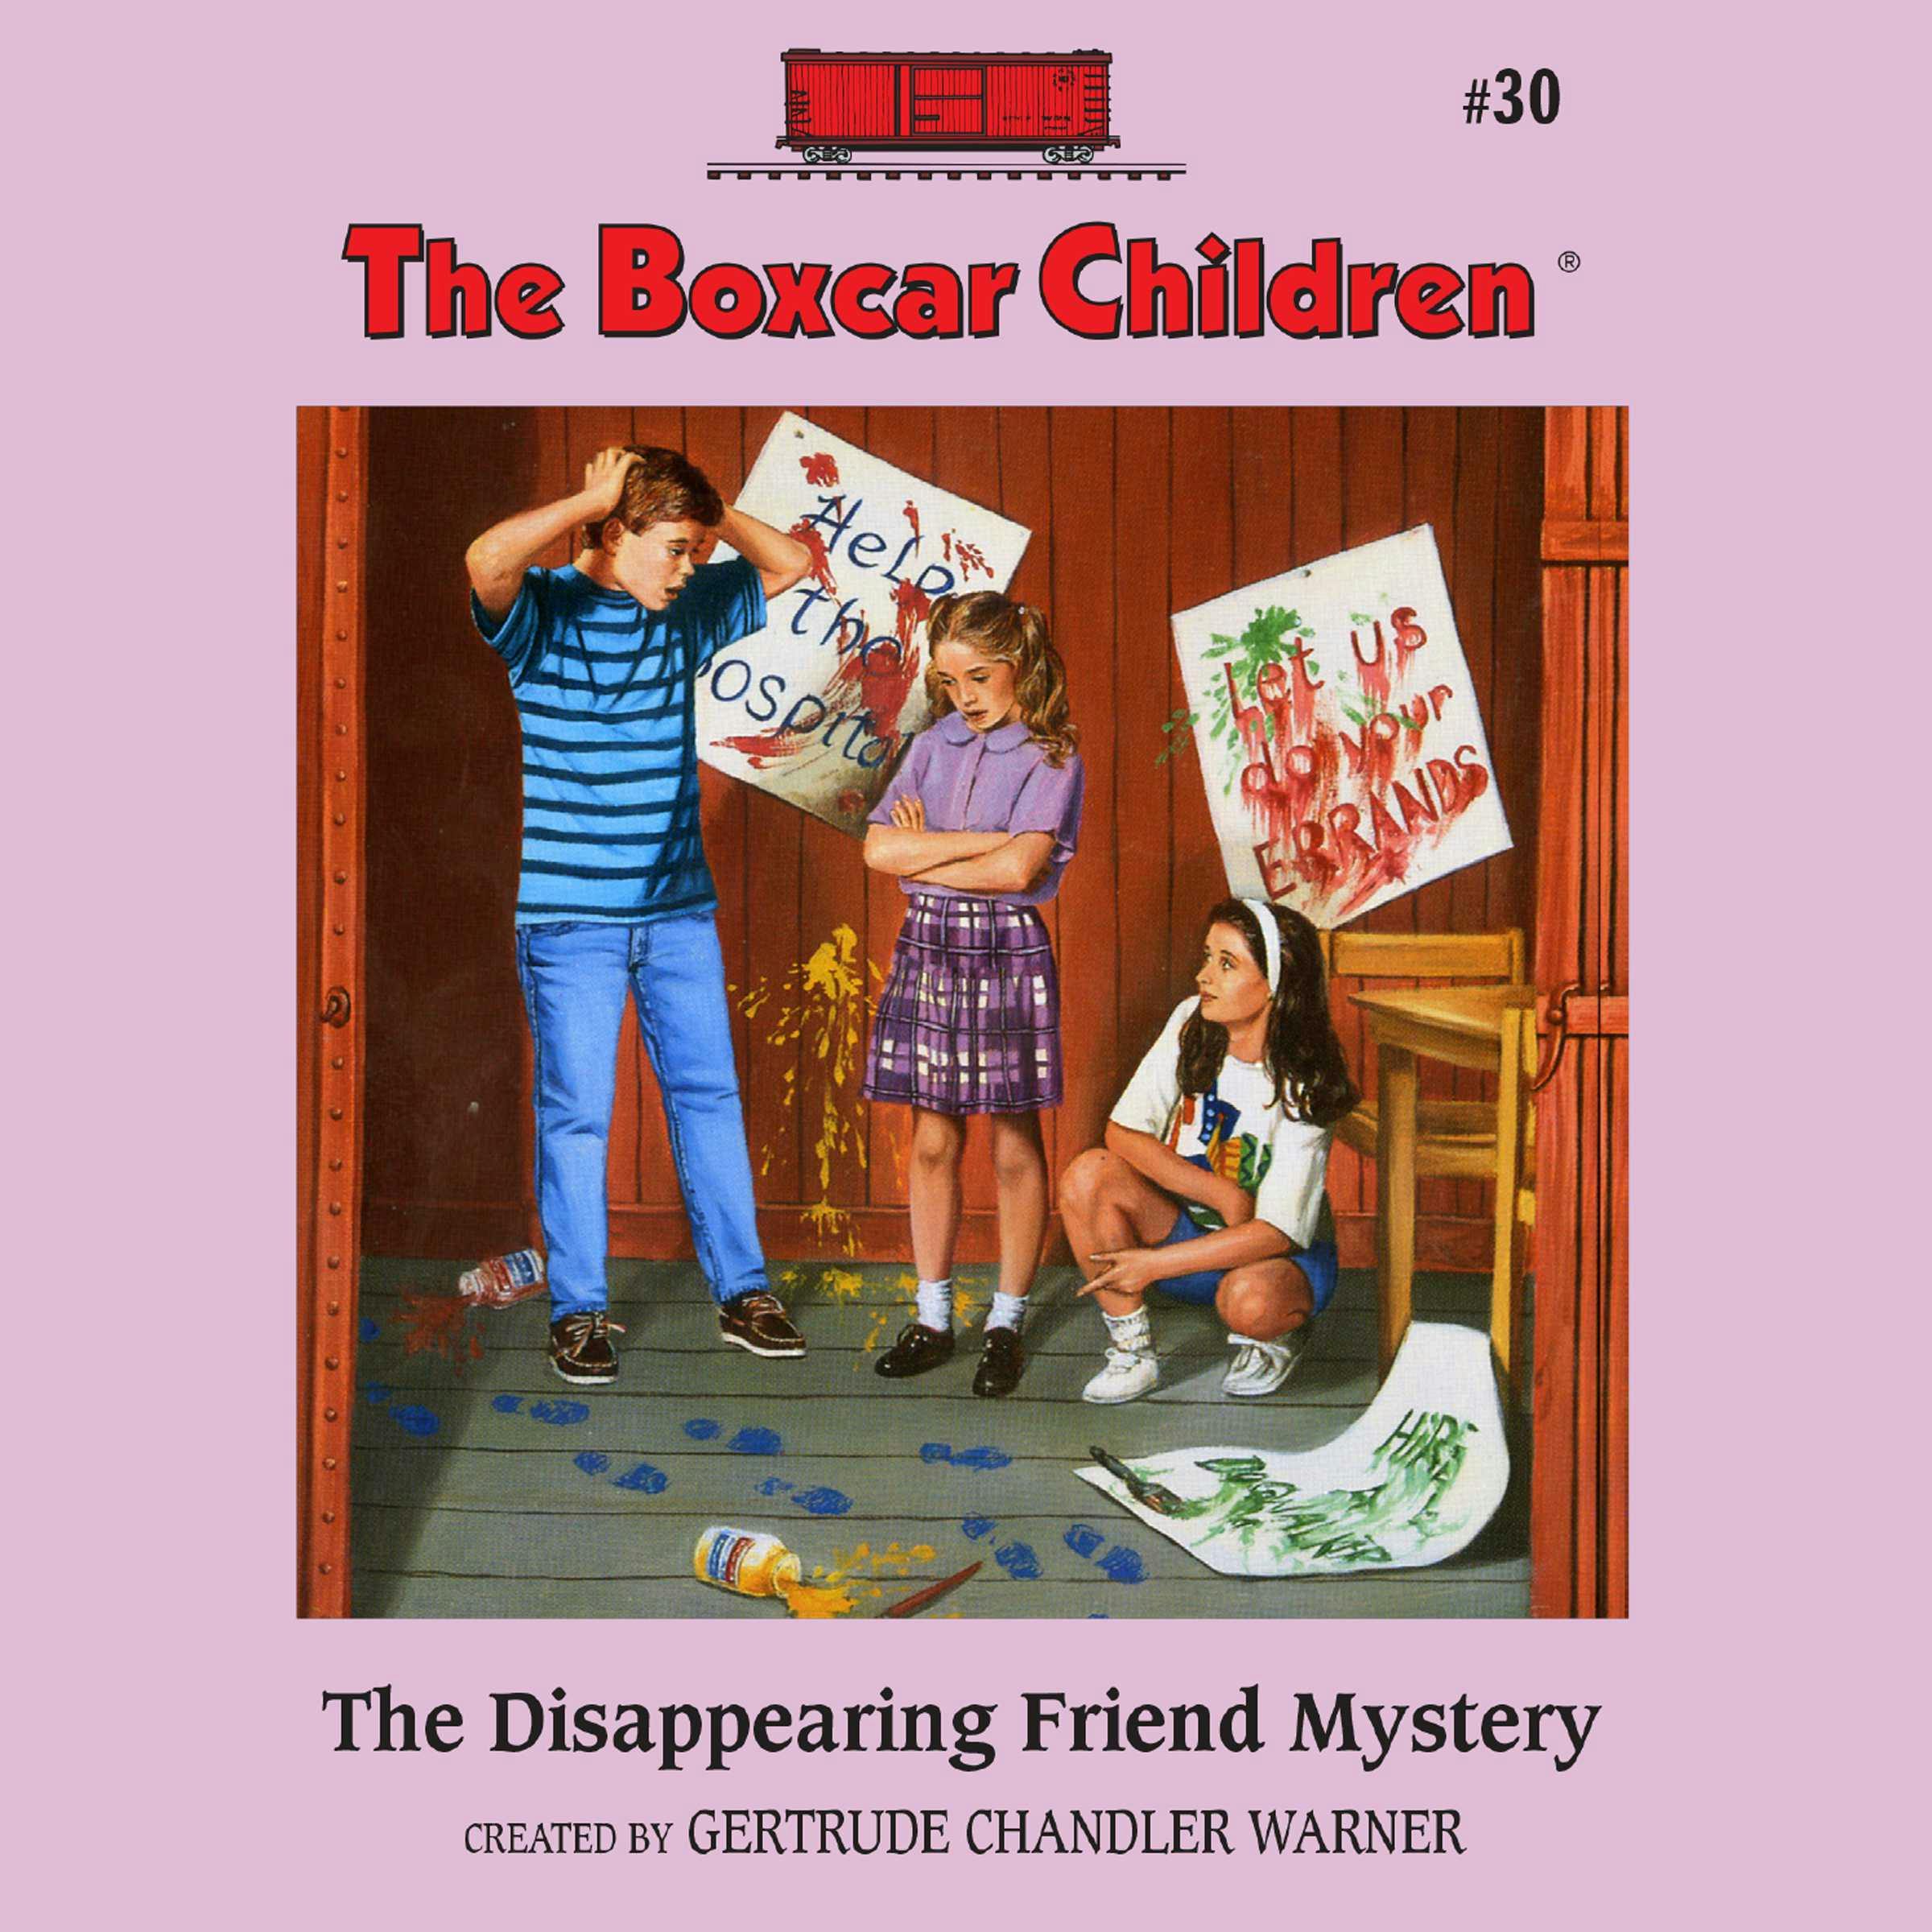 The Disappearing Friend Mystery - Gertrude Chandler Warner